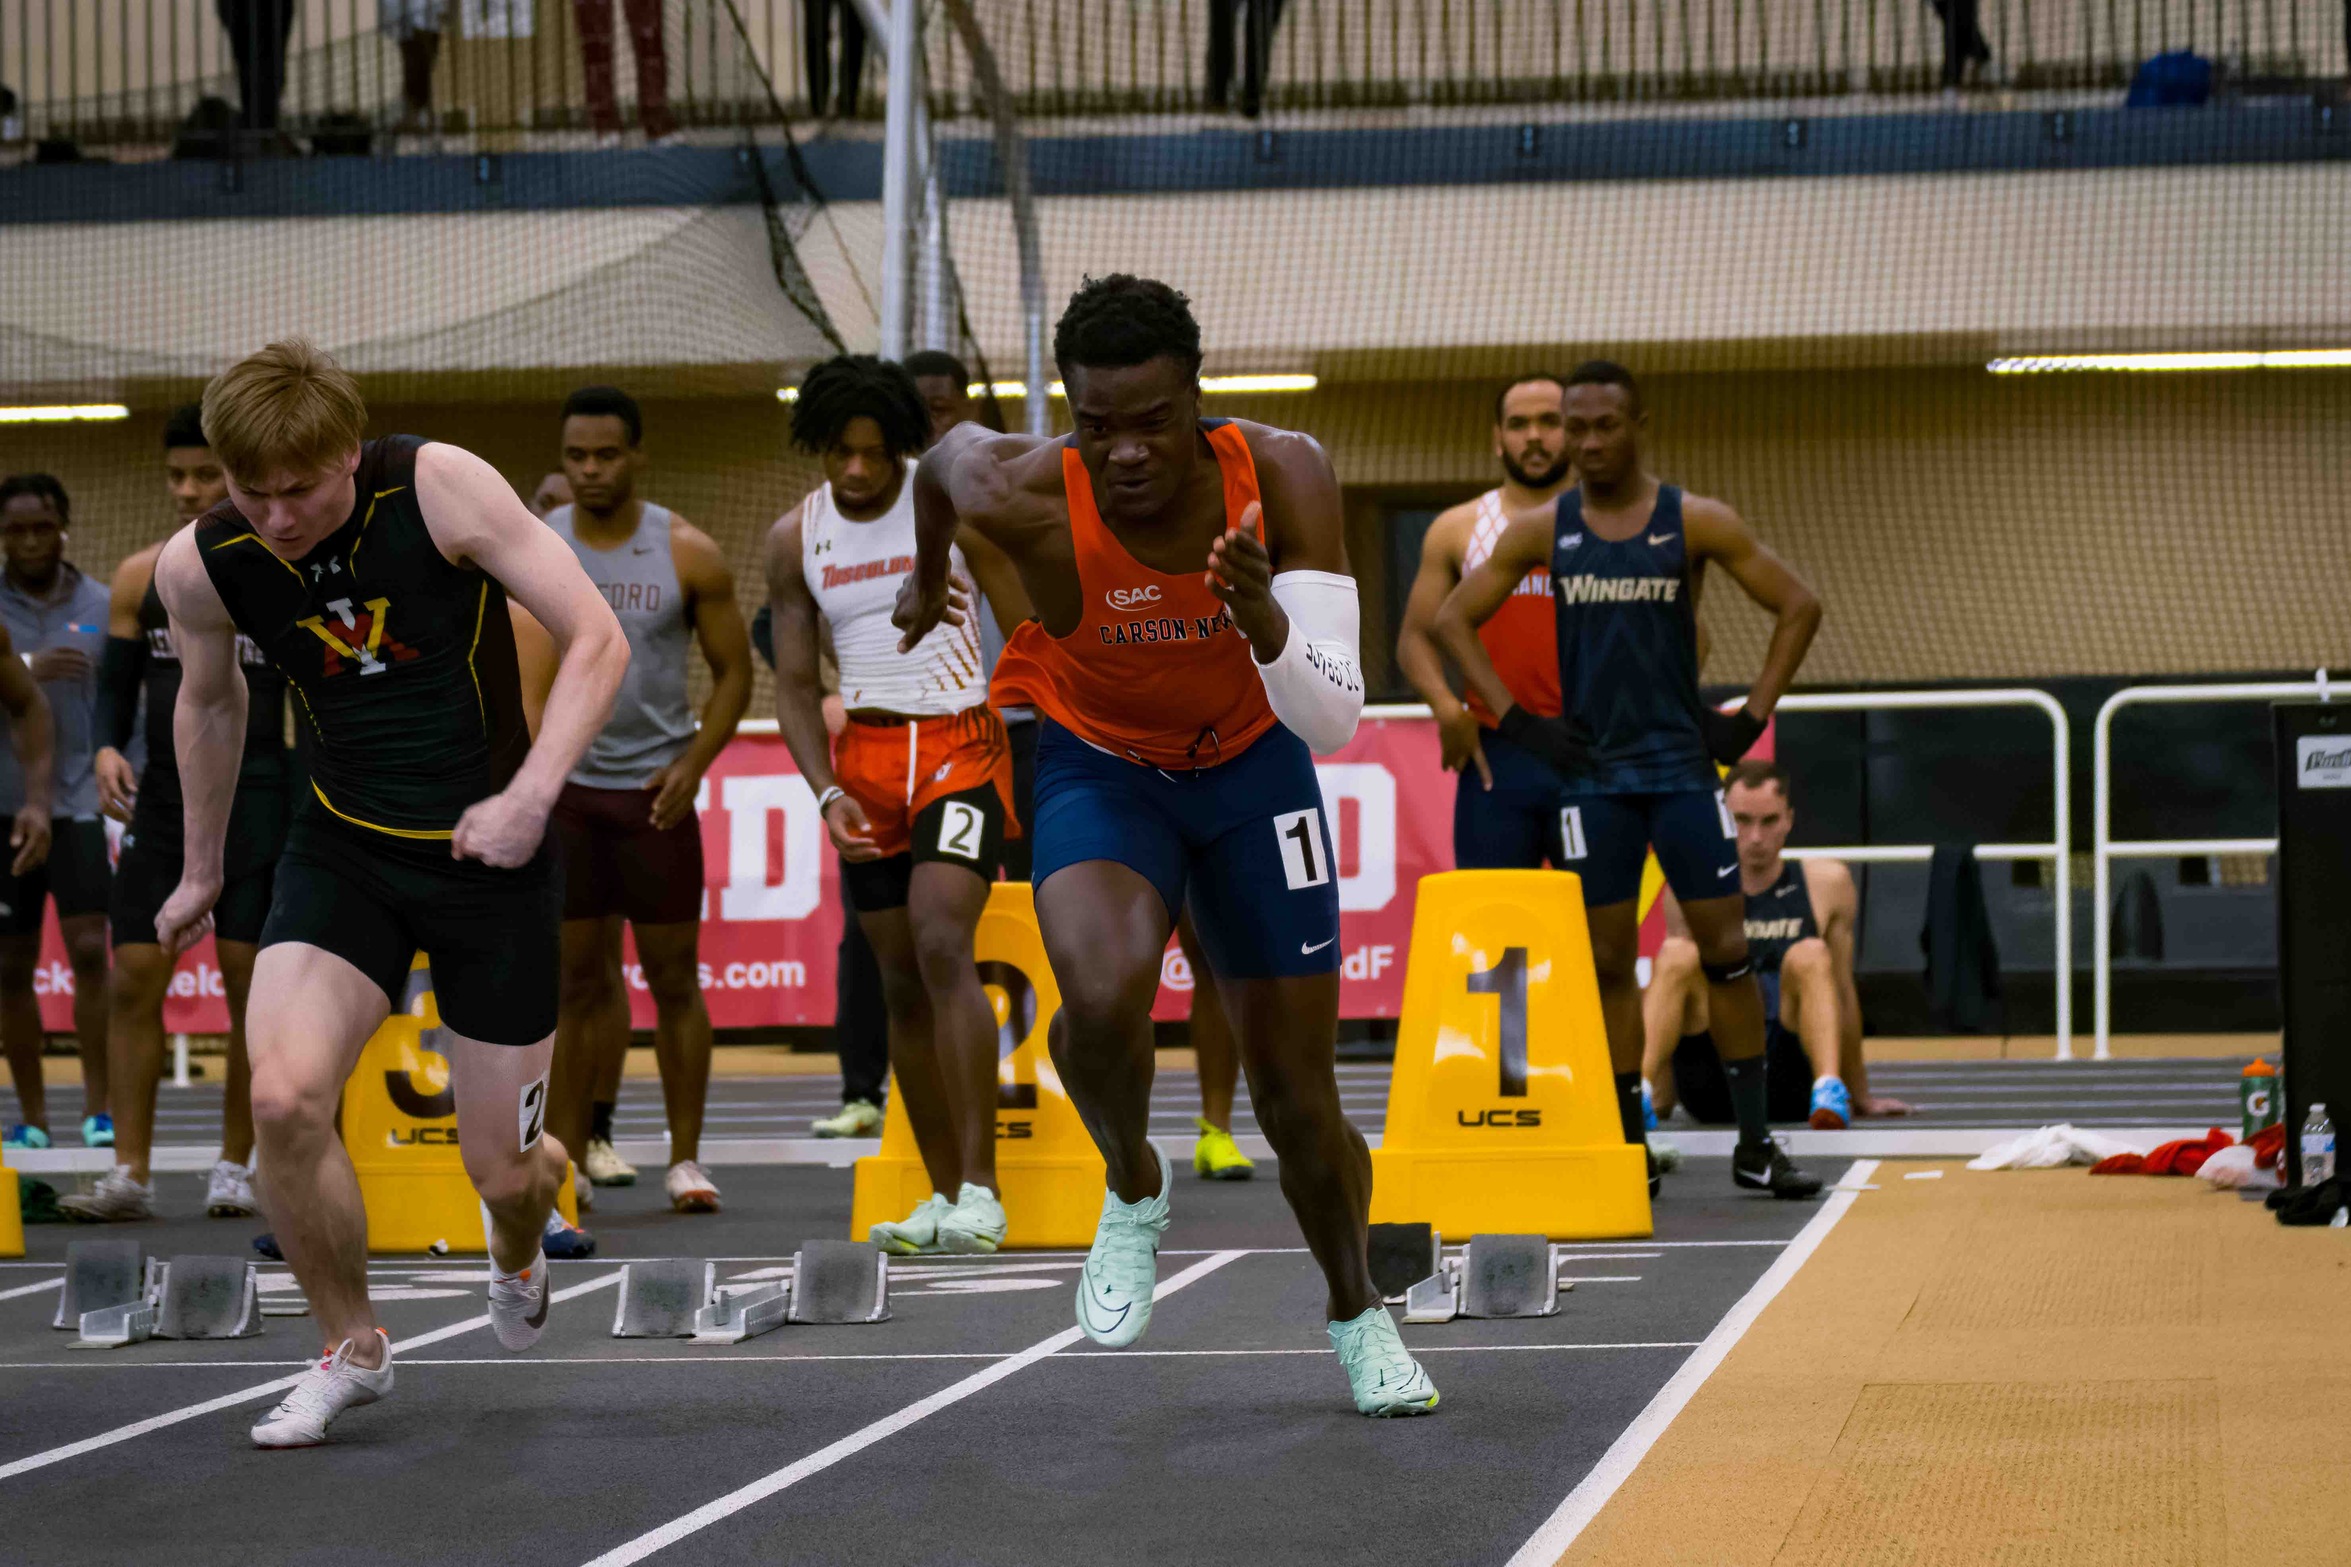 Charamba grabs gold in second day of the Georgia Tech Invitational